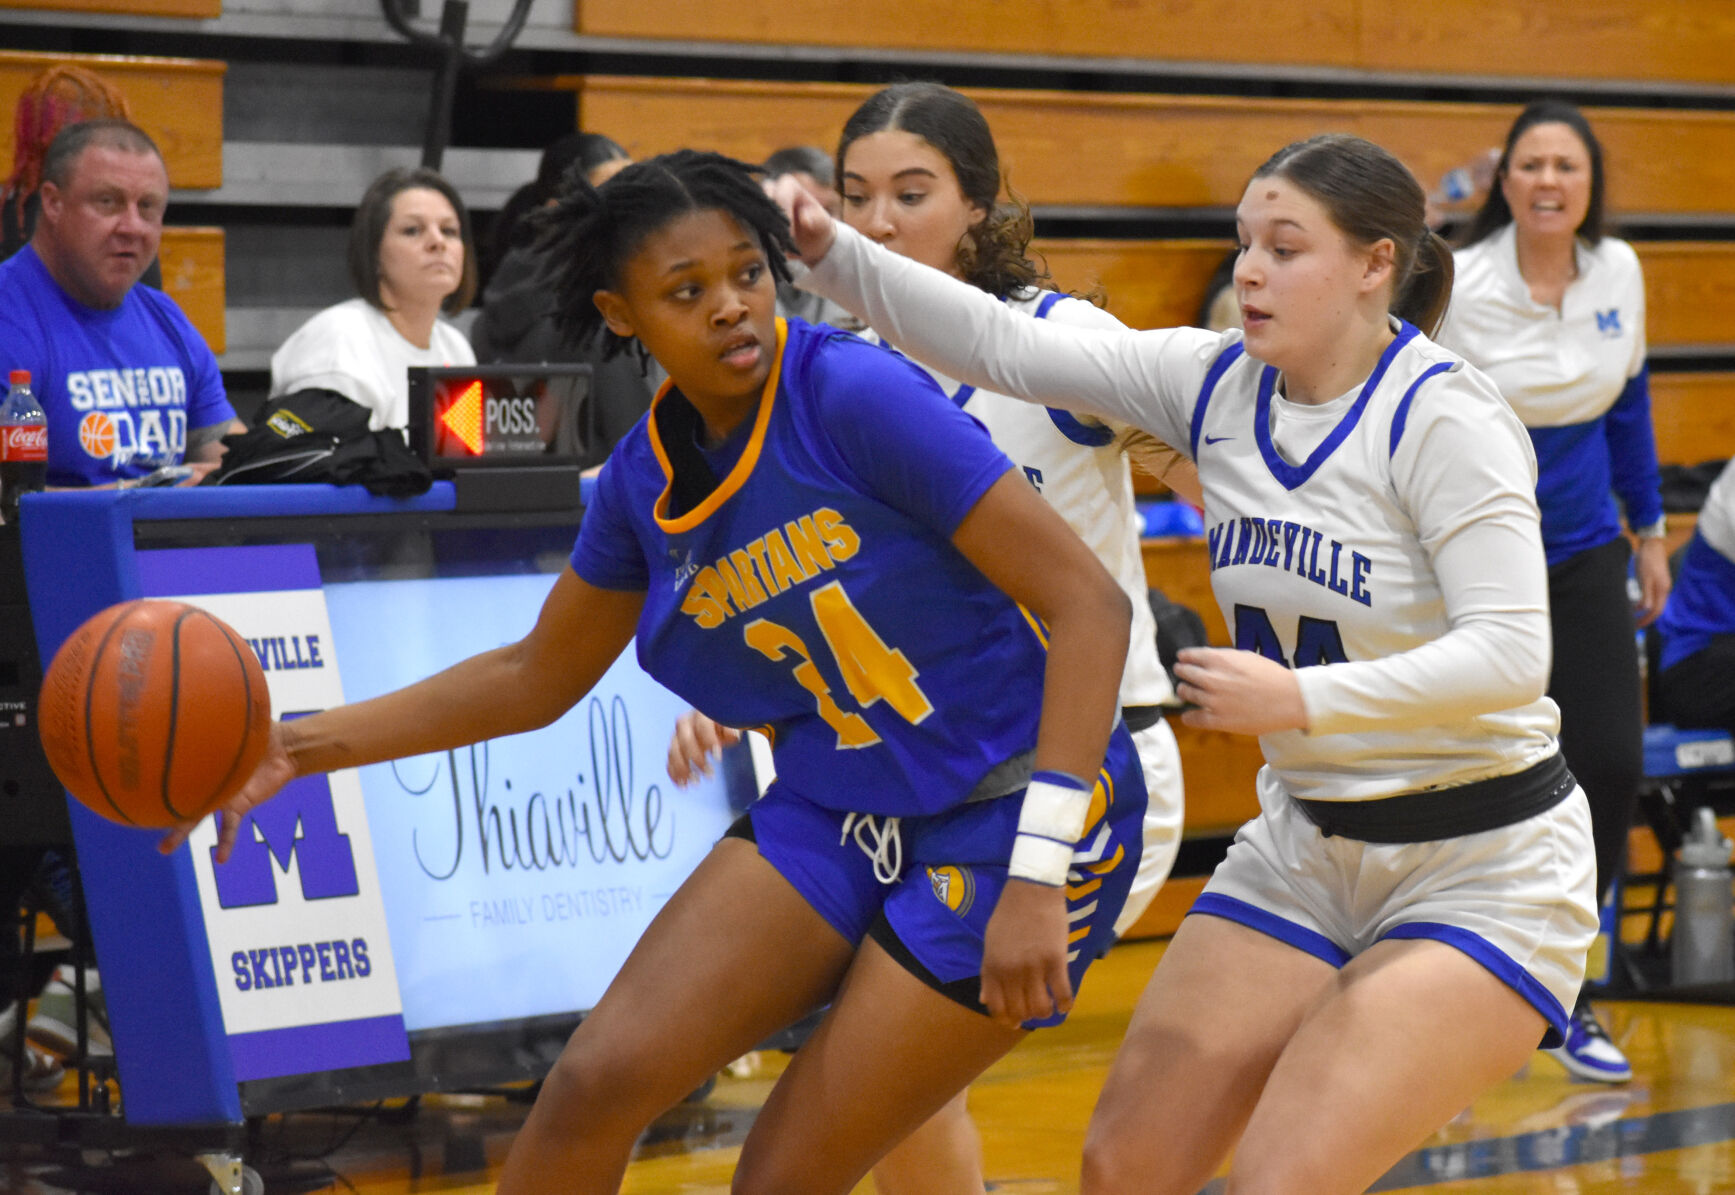 Mandeville Girls Basketball Team Secure 51-39 Victory, One Win Away from Top 28